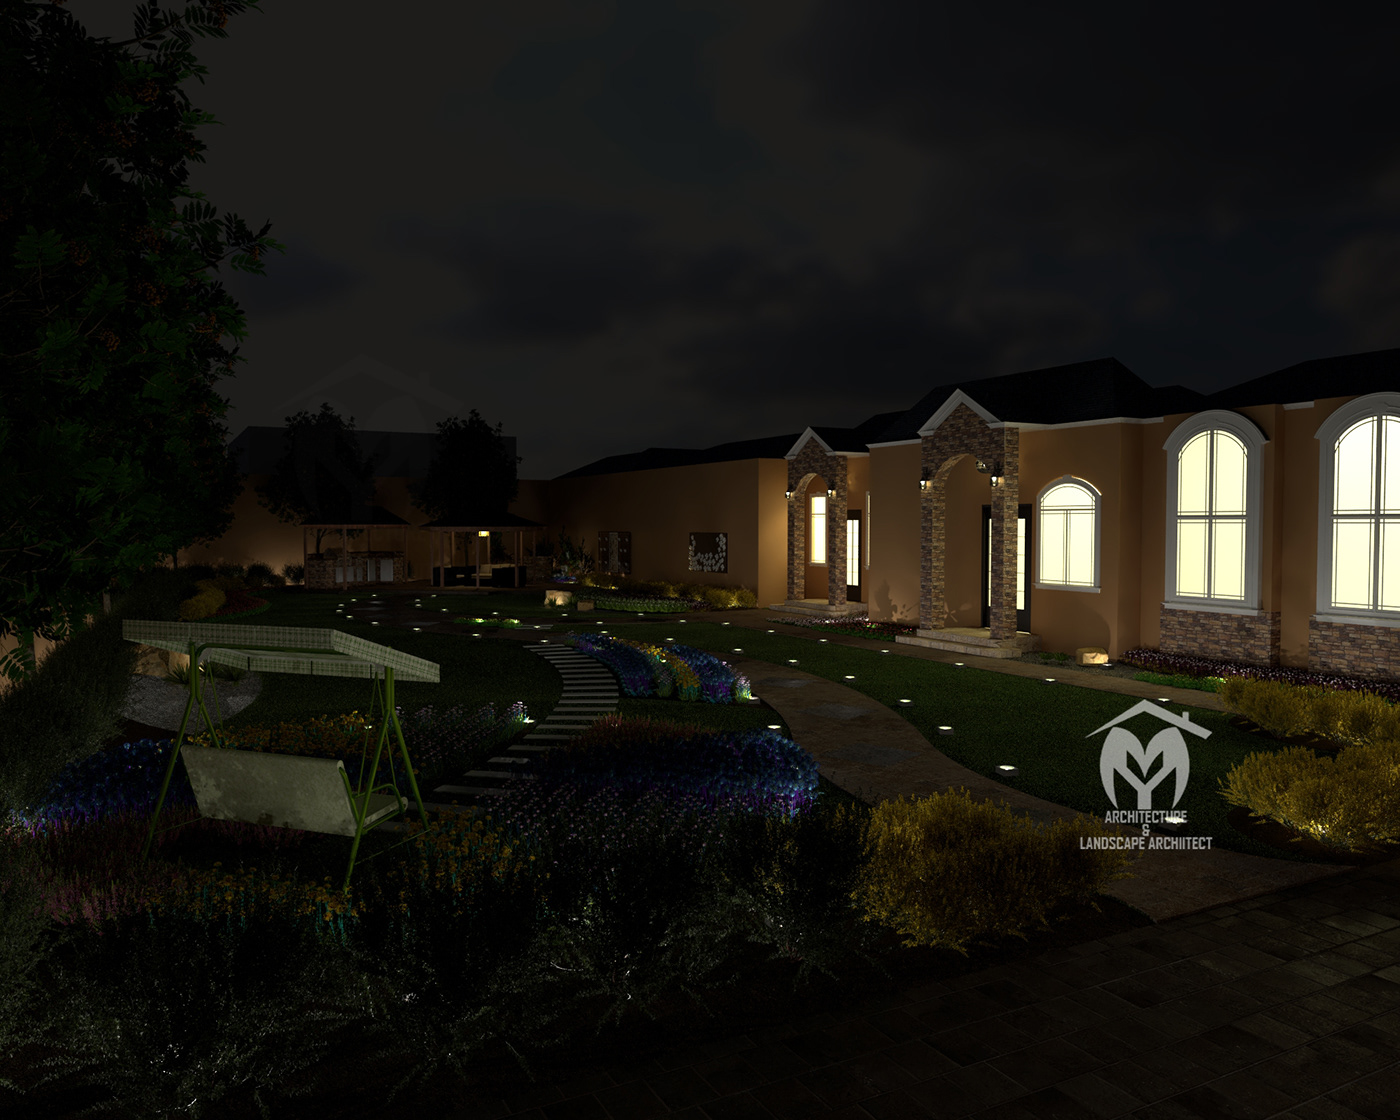 Designing extend of existing house and landscaping front yard Software used @googlesketchup @autocad @chaosgroup for rendering Swipe right 🌹 Ps: to see night shoots much better make your